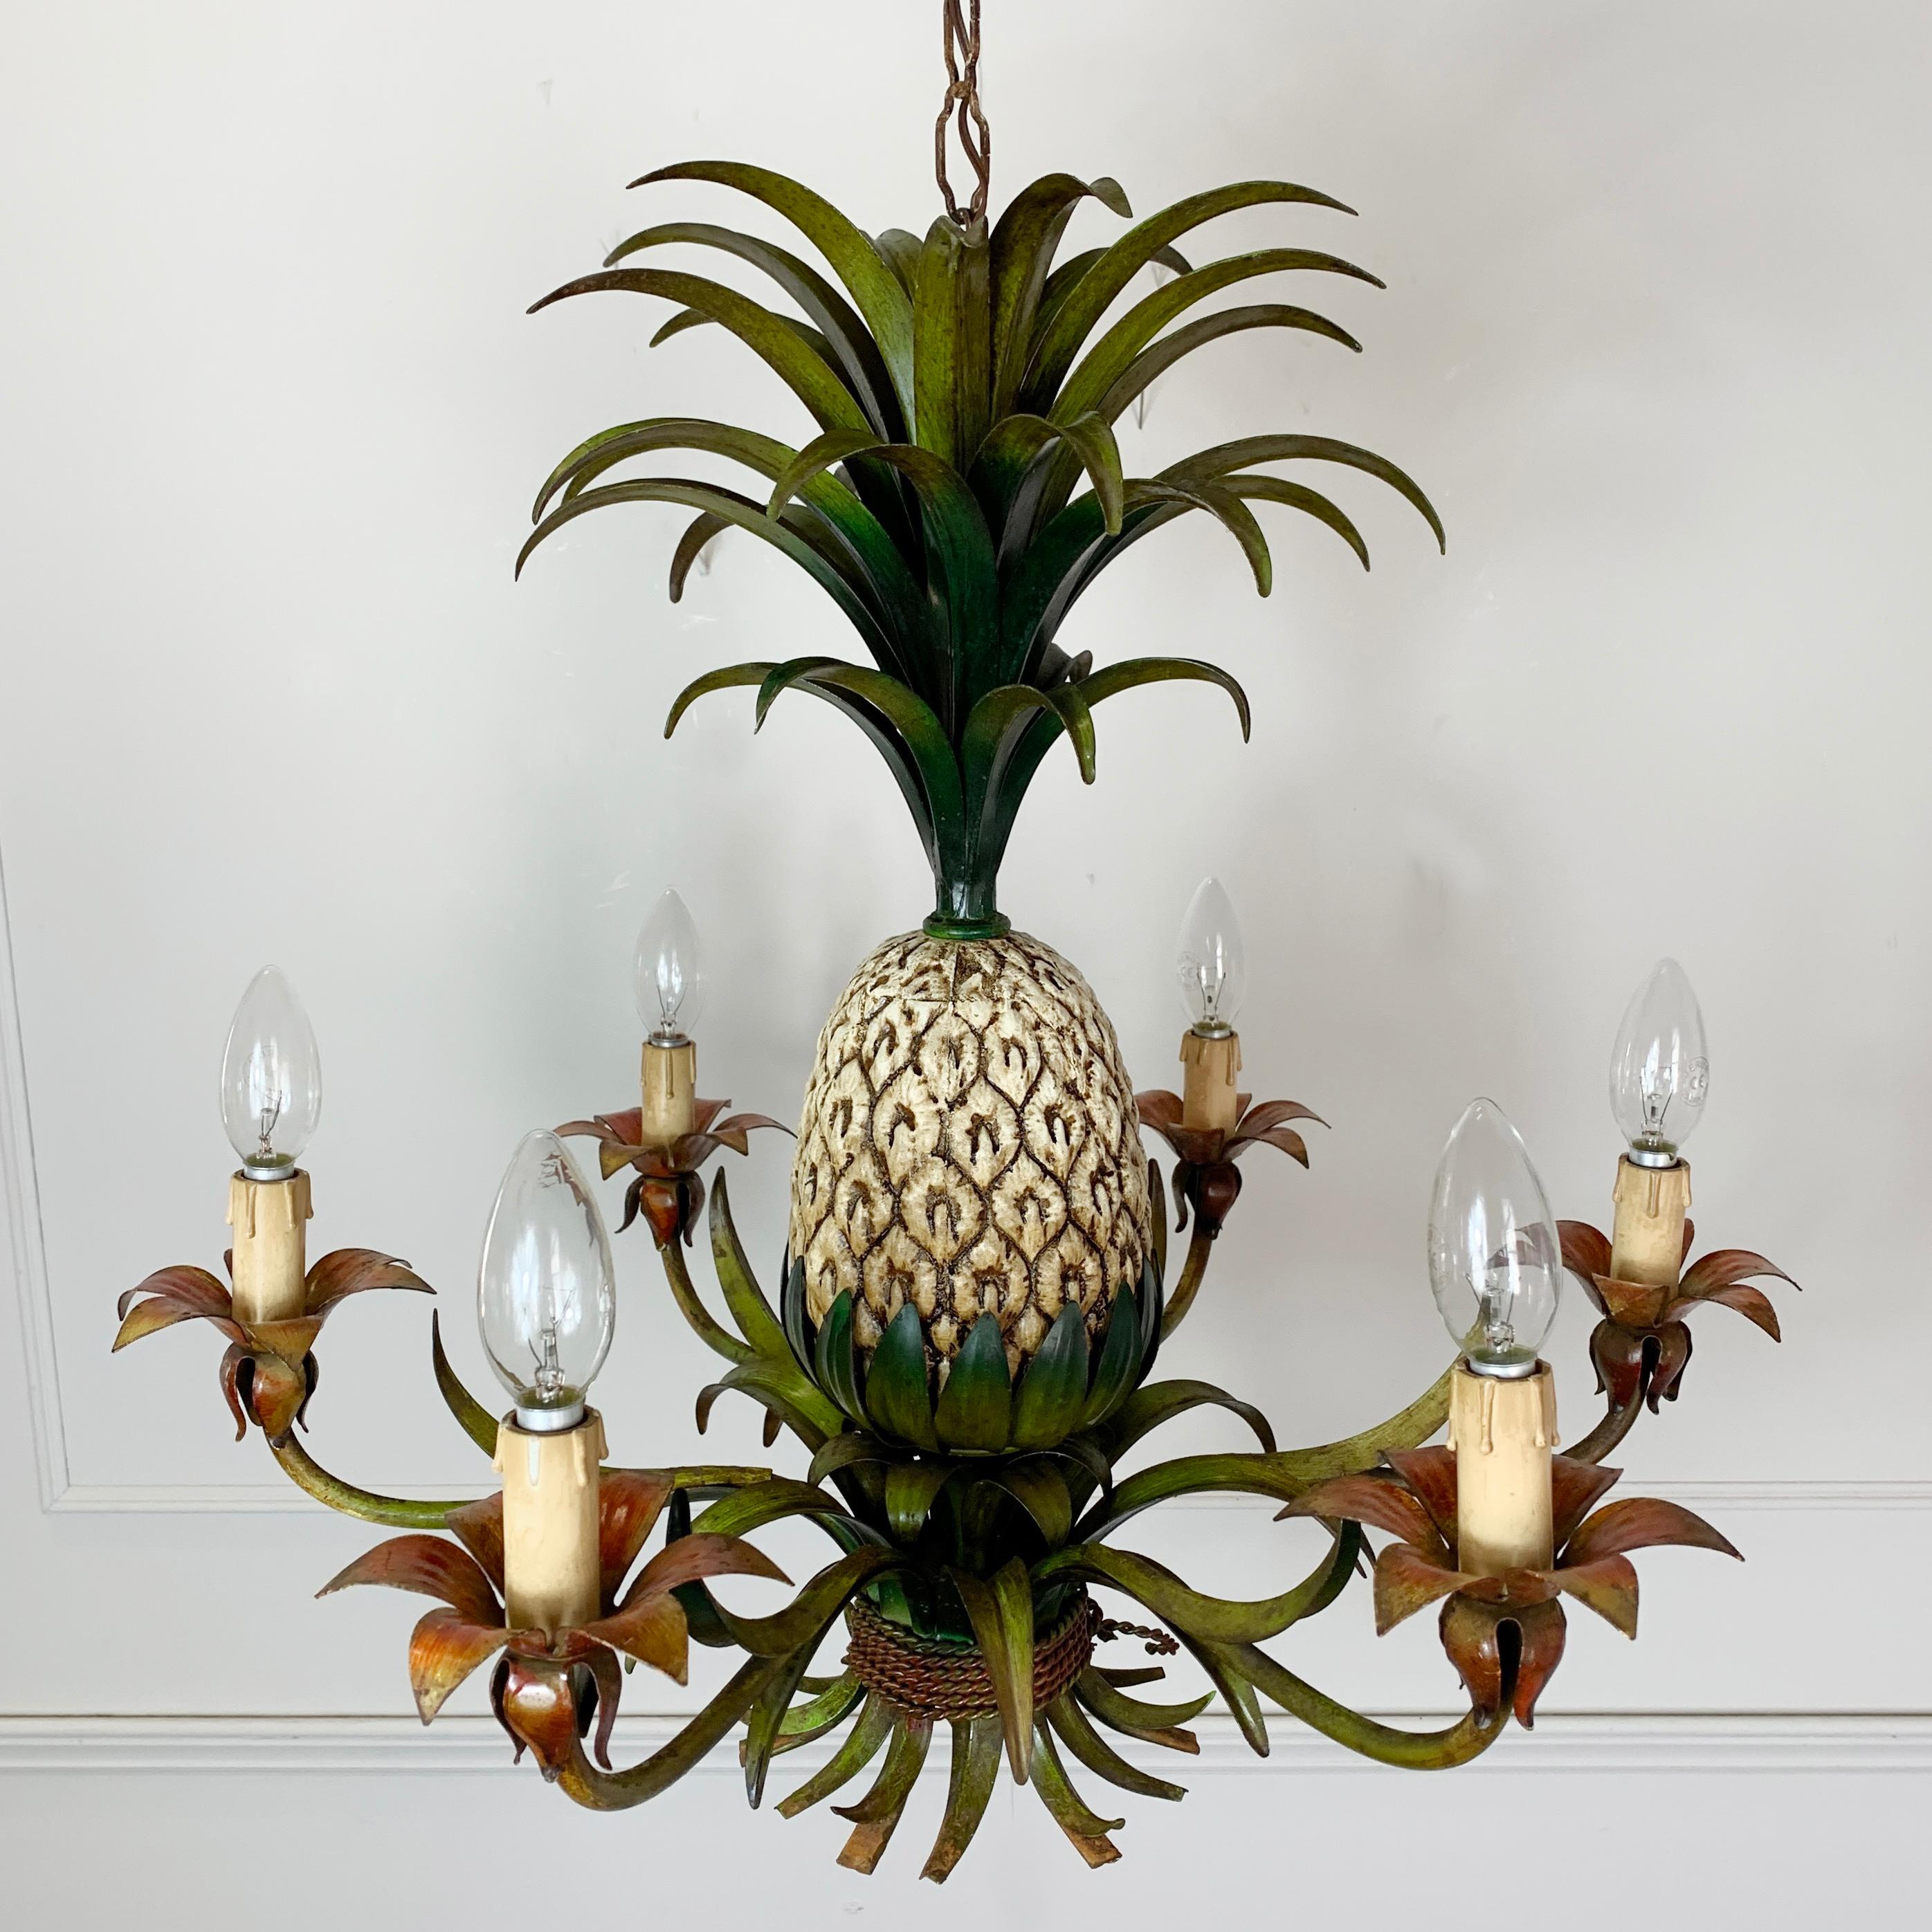 Hand-Crafted 1950s Pineapple Toleware Chandelier